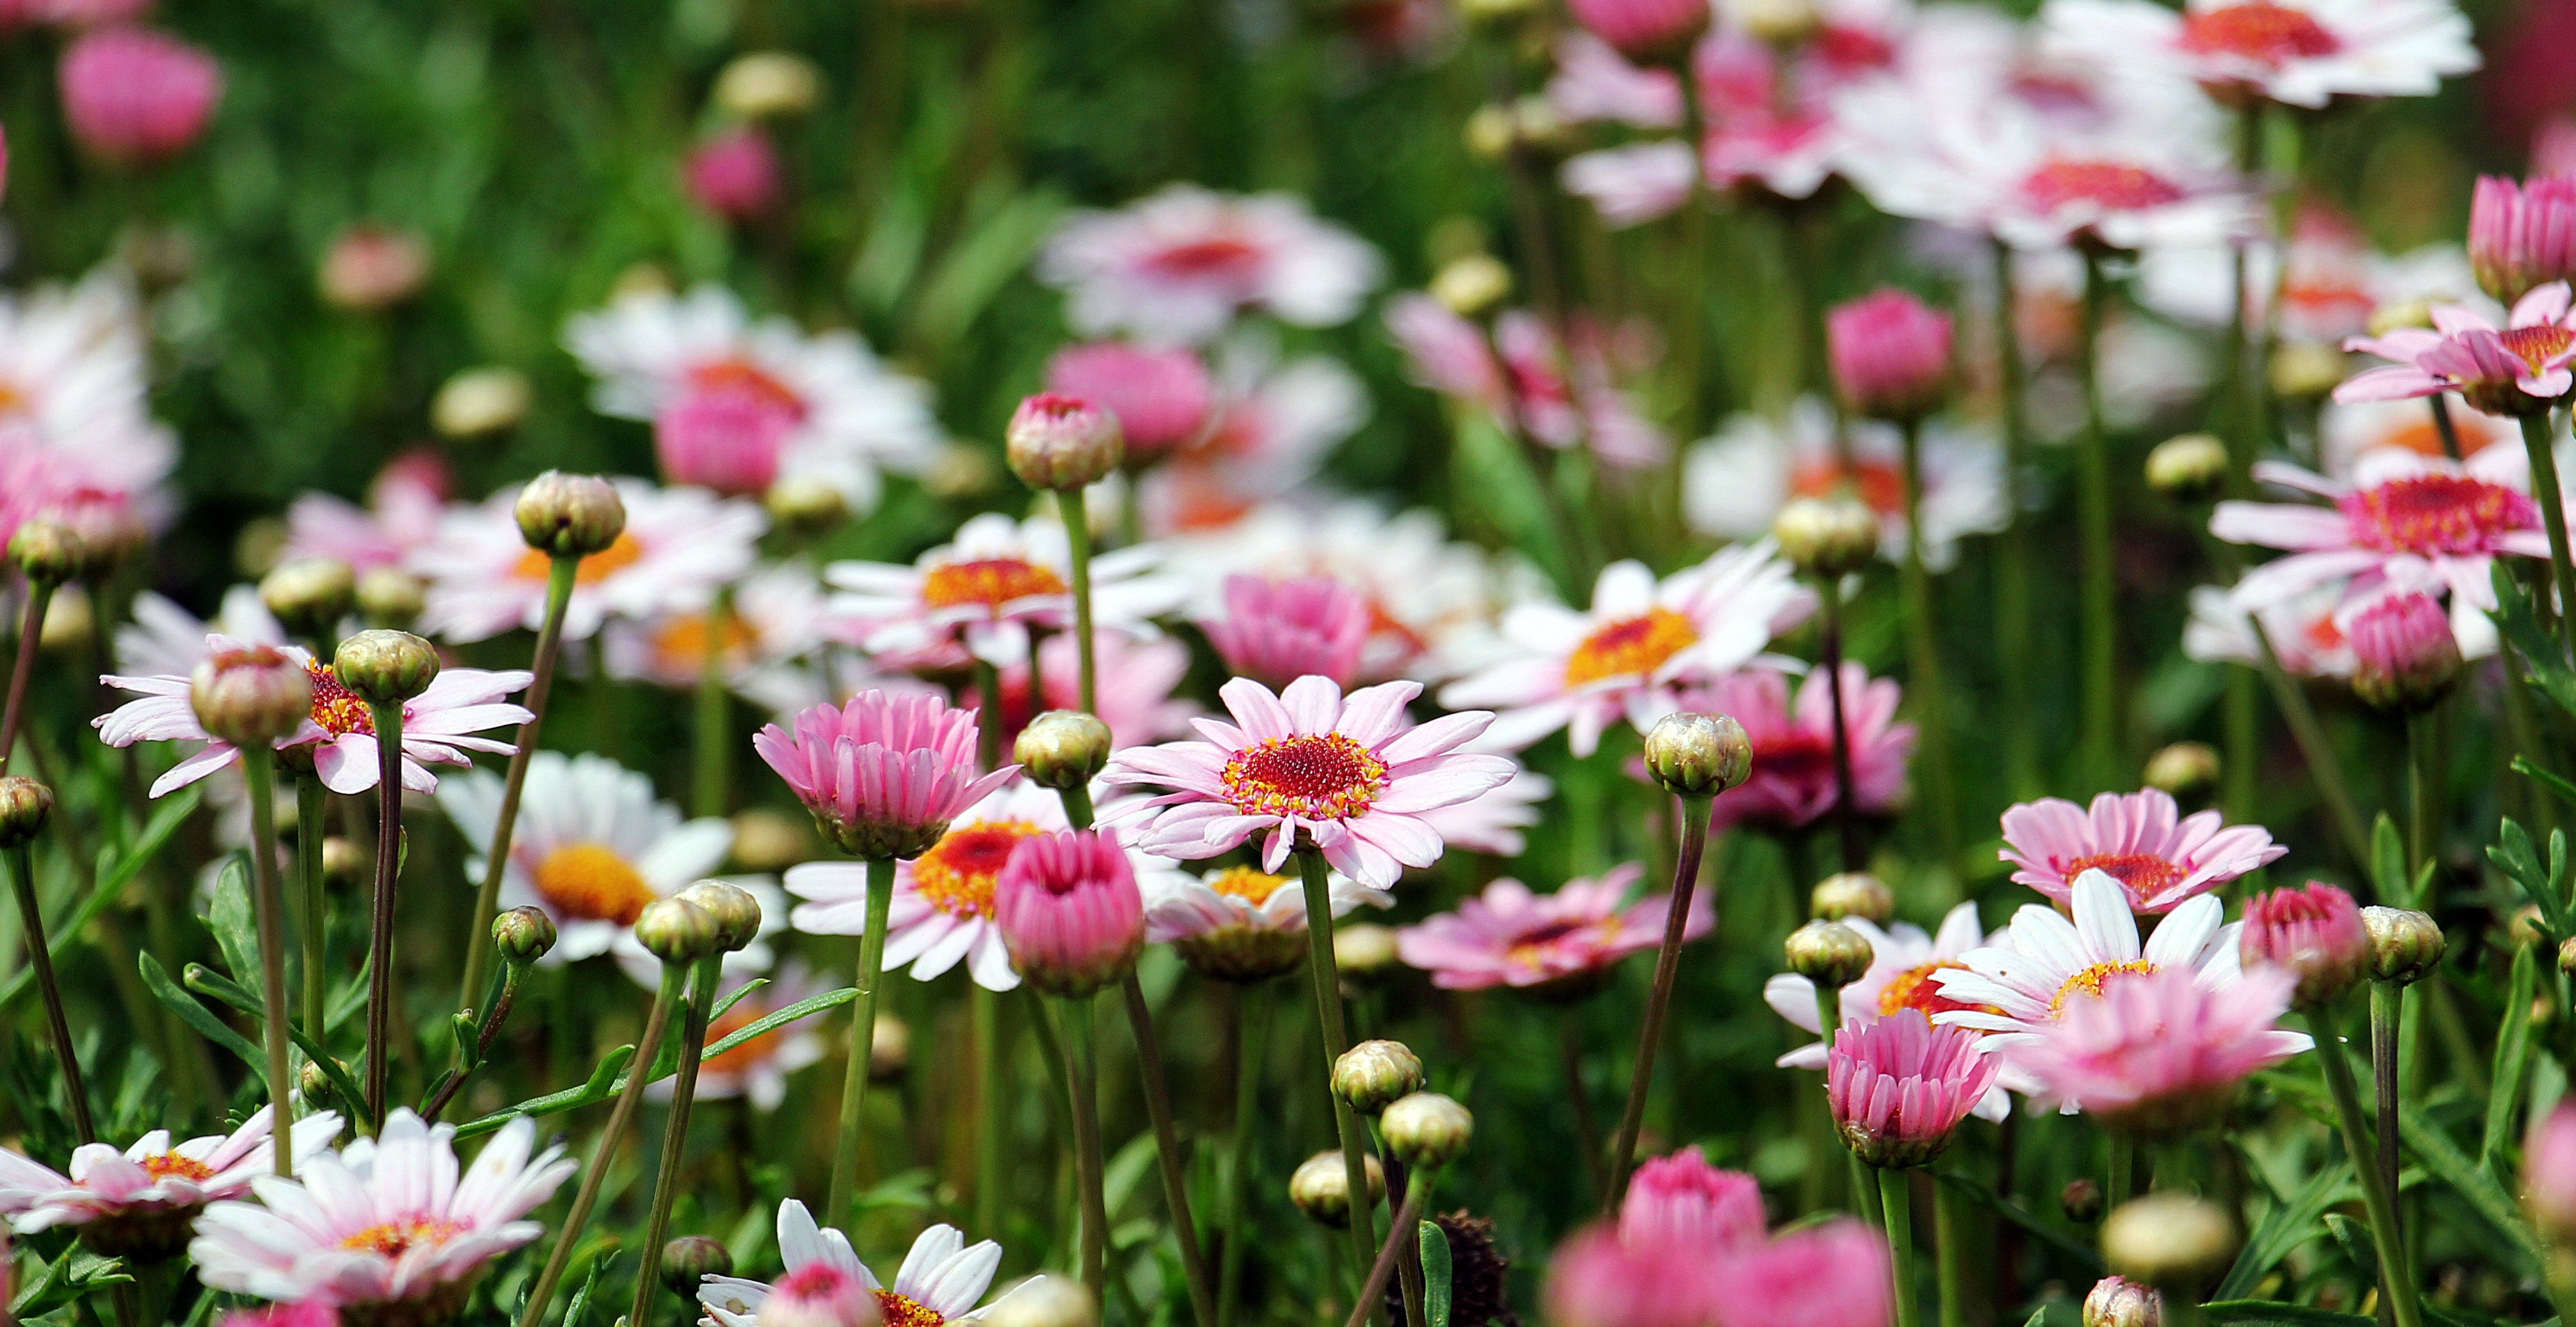 A glade with beautiful daisy flowers.